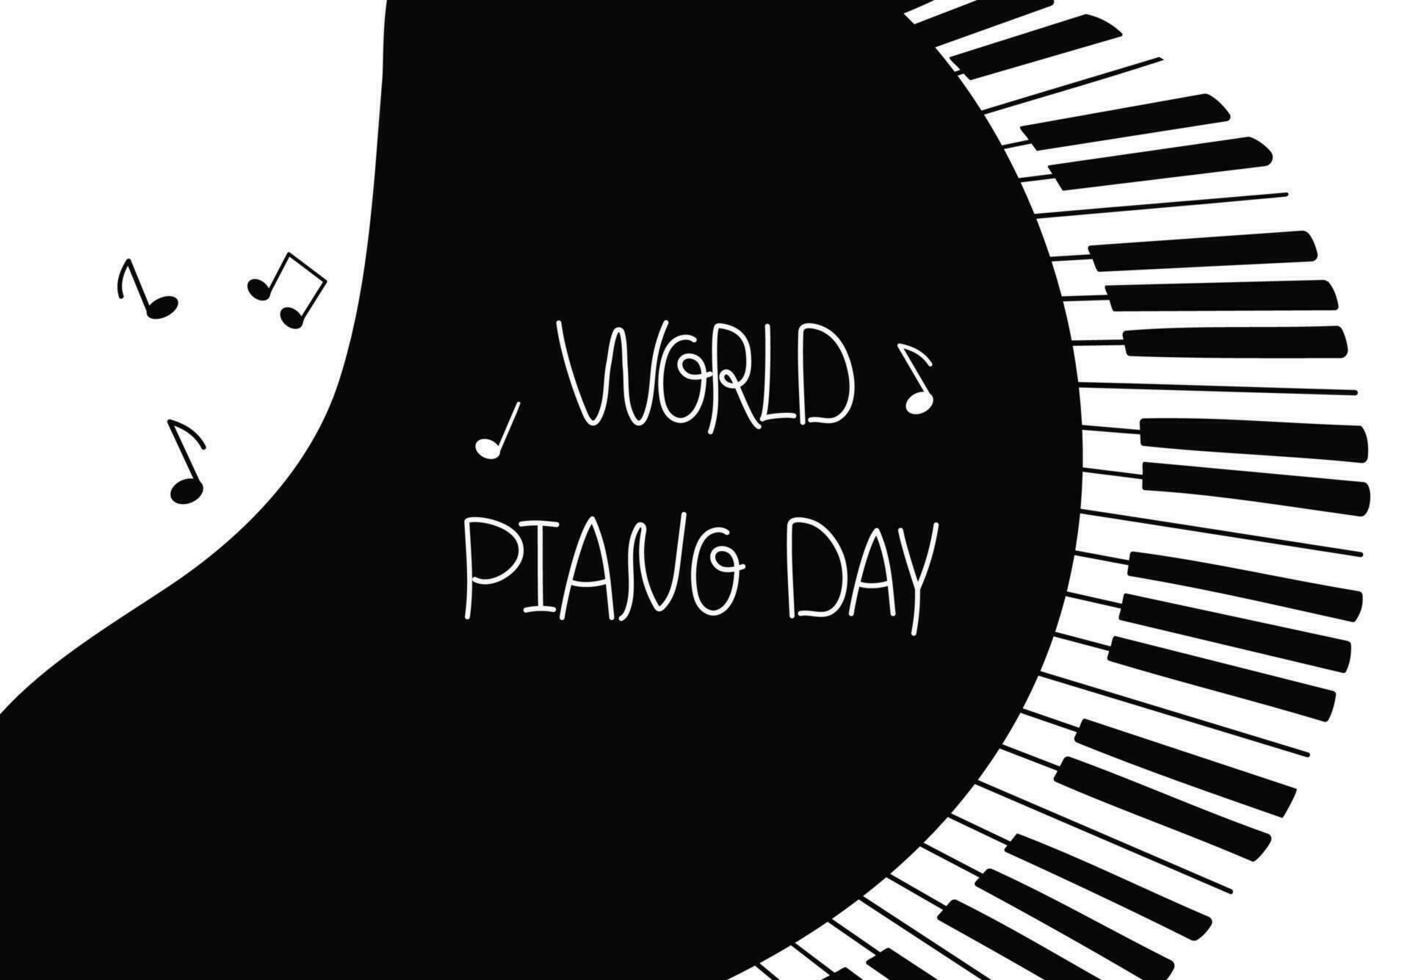 World piano day. Grand piano, musical instrument. Keys. Concert, music performance. vector